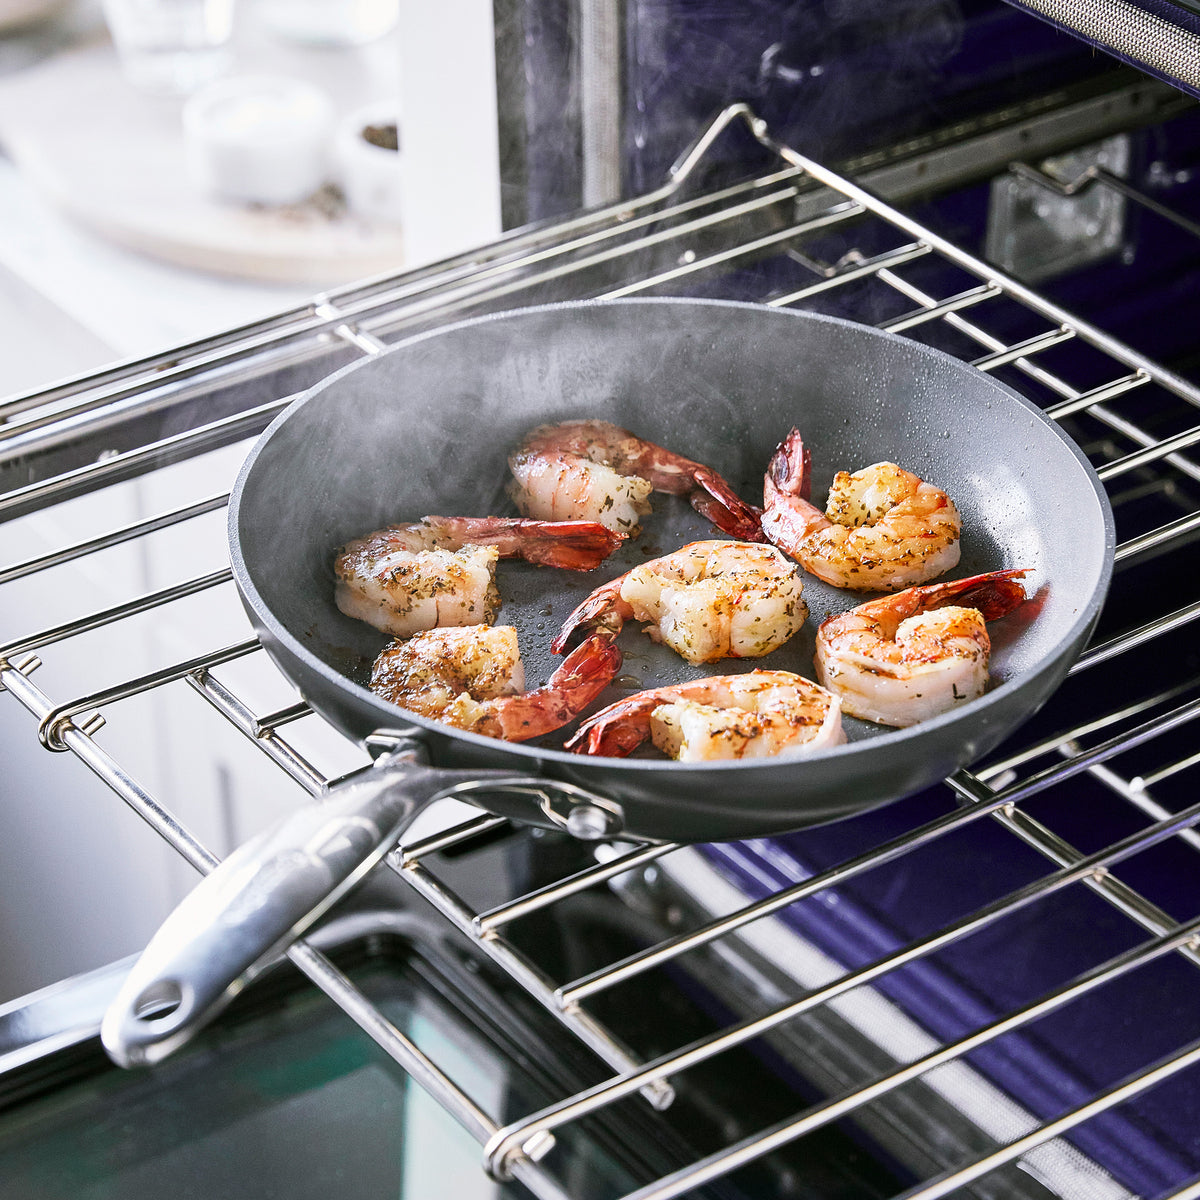 The 8 best griddles and grill pans on  in 2022